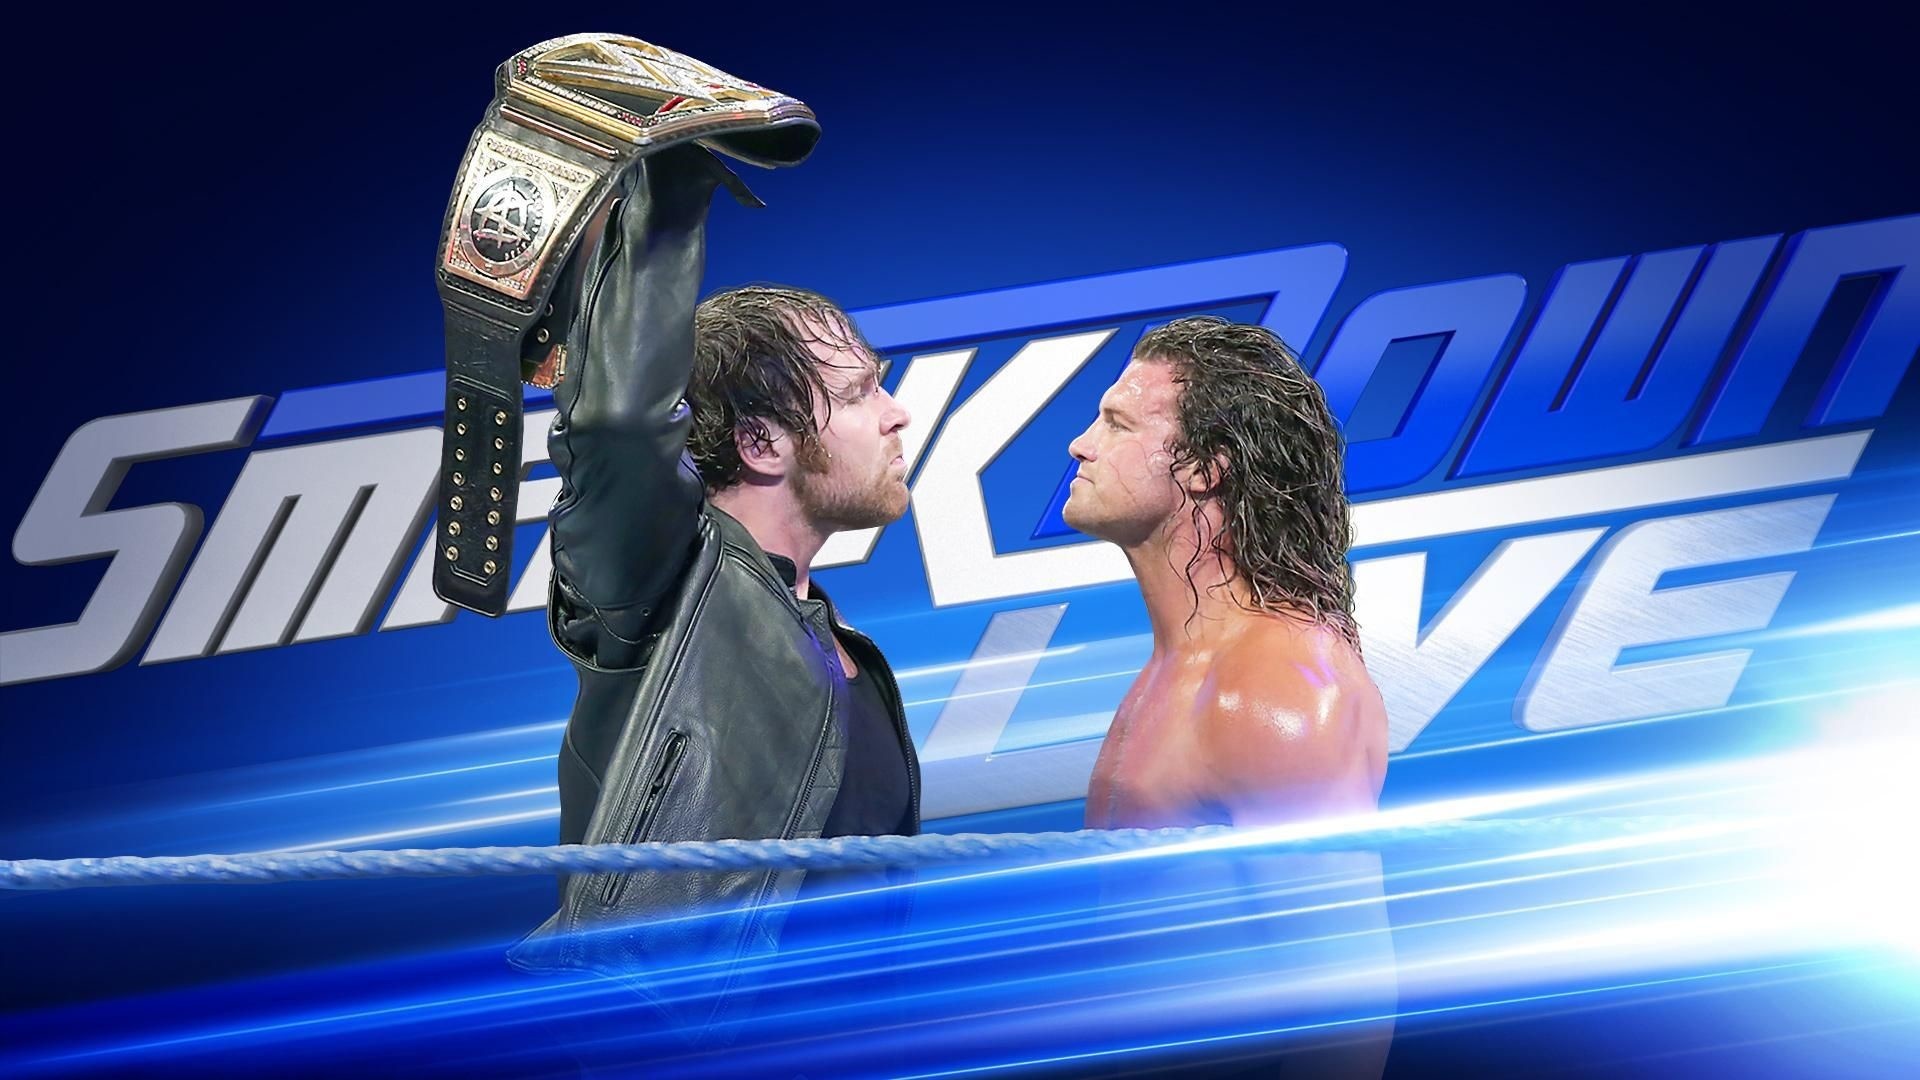 WWE SmackDown, Smack down wallpapers, Background pictures, Wrestling, 1920x1080 Full HD Desktop